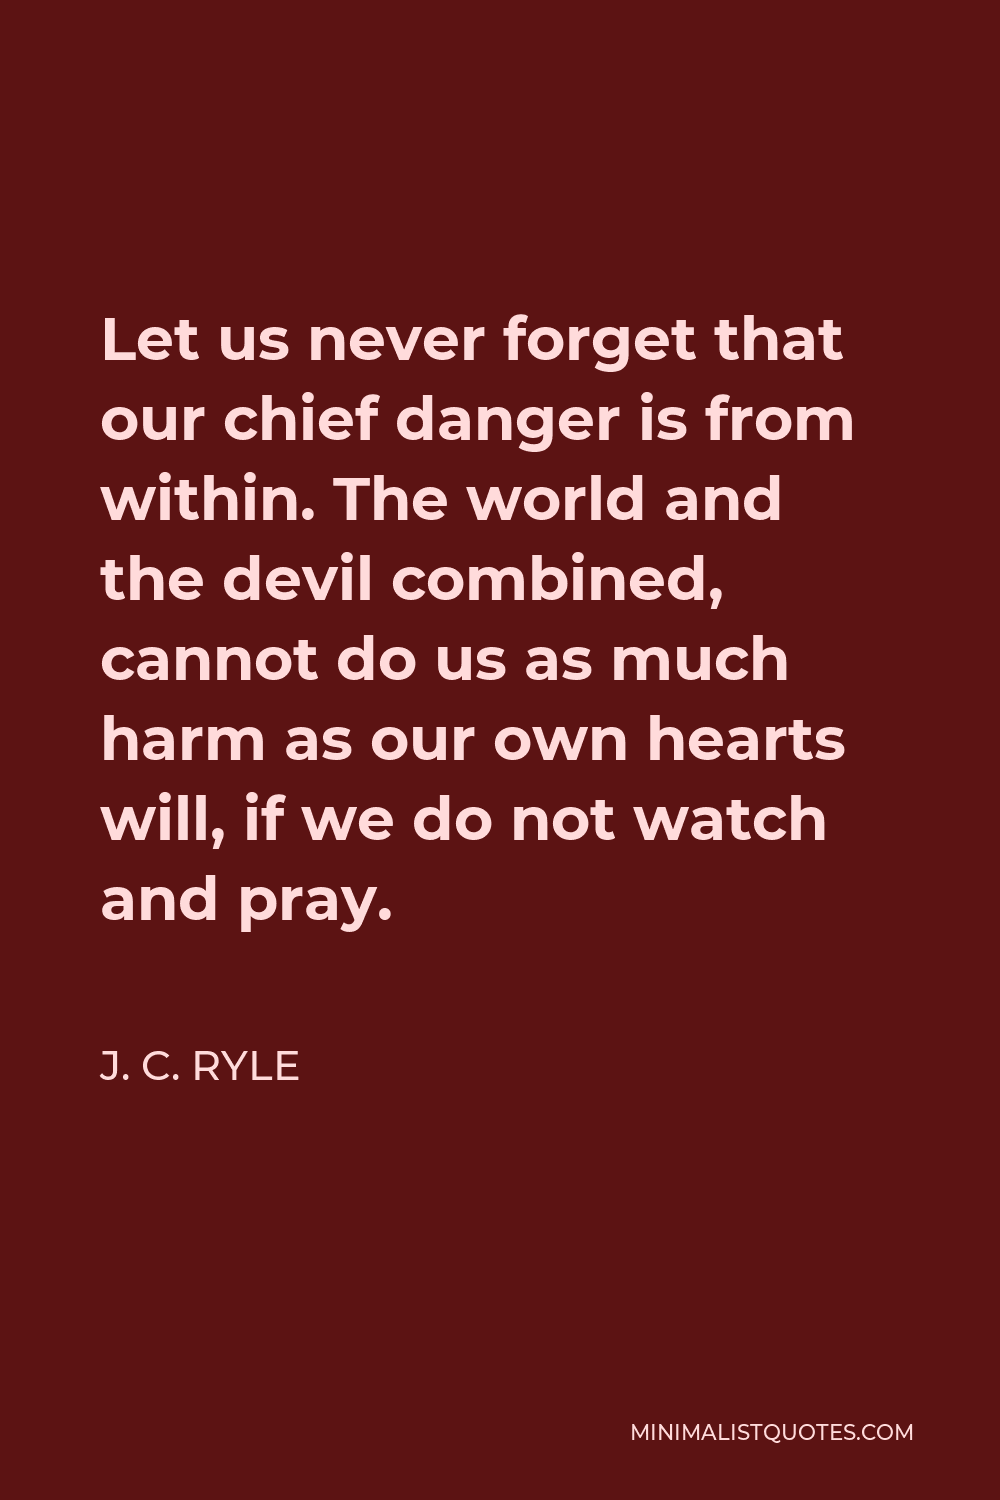 J. C. Ryle Quote - Let us never forget that our chief danger is from within. The world and the devil combined, cannot do us as much harm as our own hearts will, if we do not watch and pray.